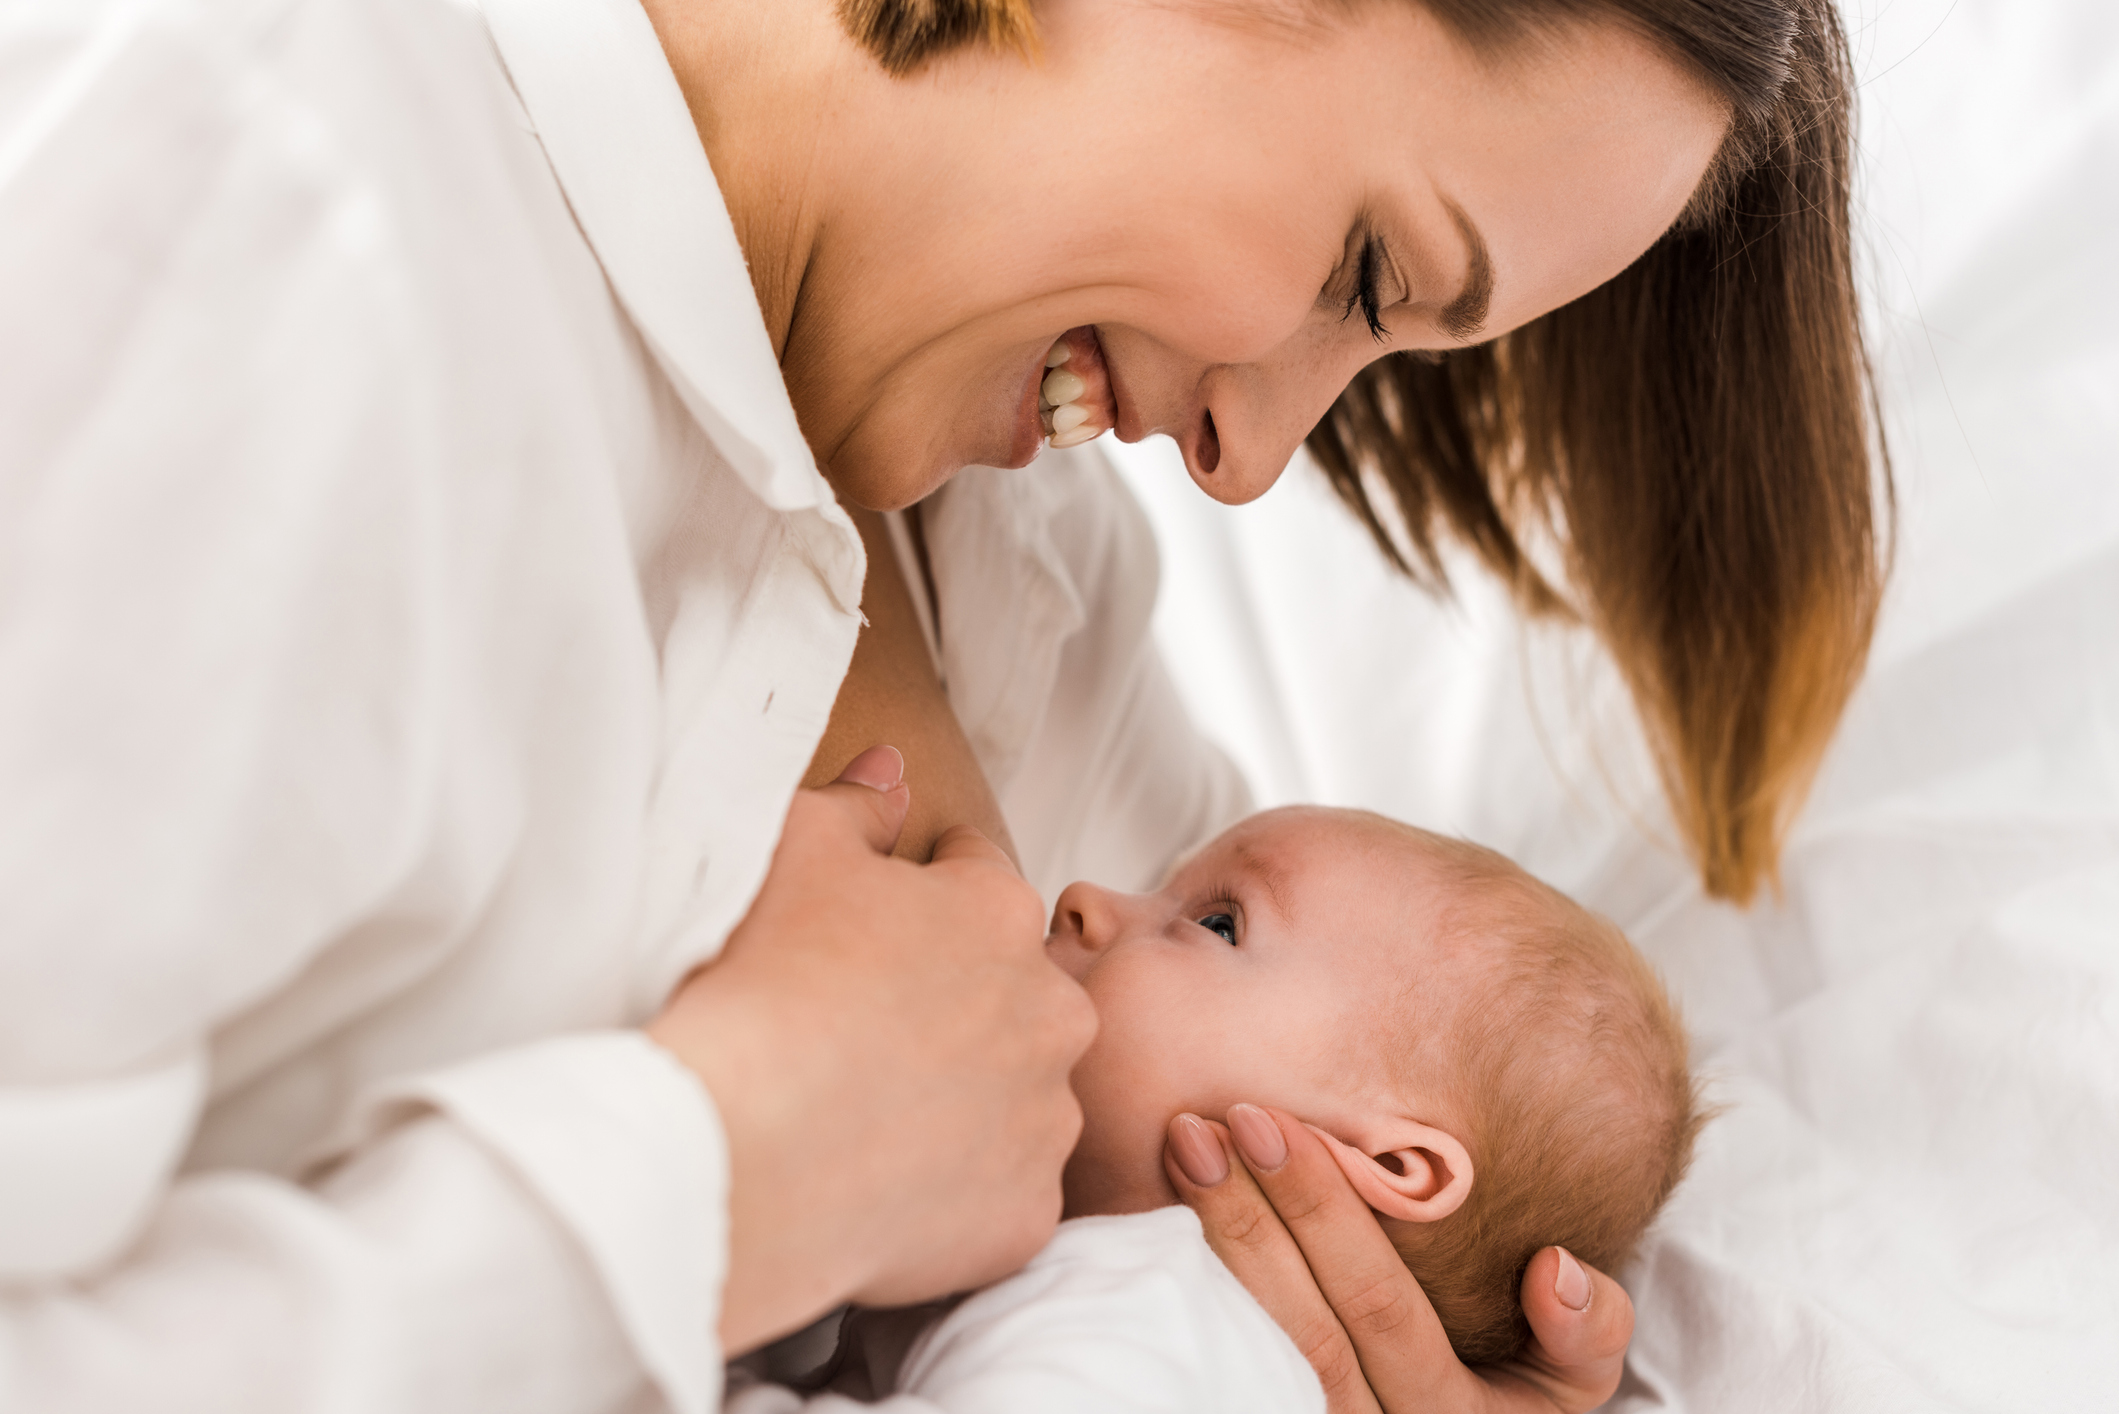 A happy woman in a white shirt breastfeeds her newborn